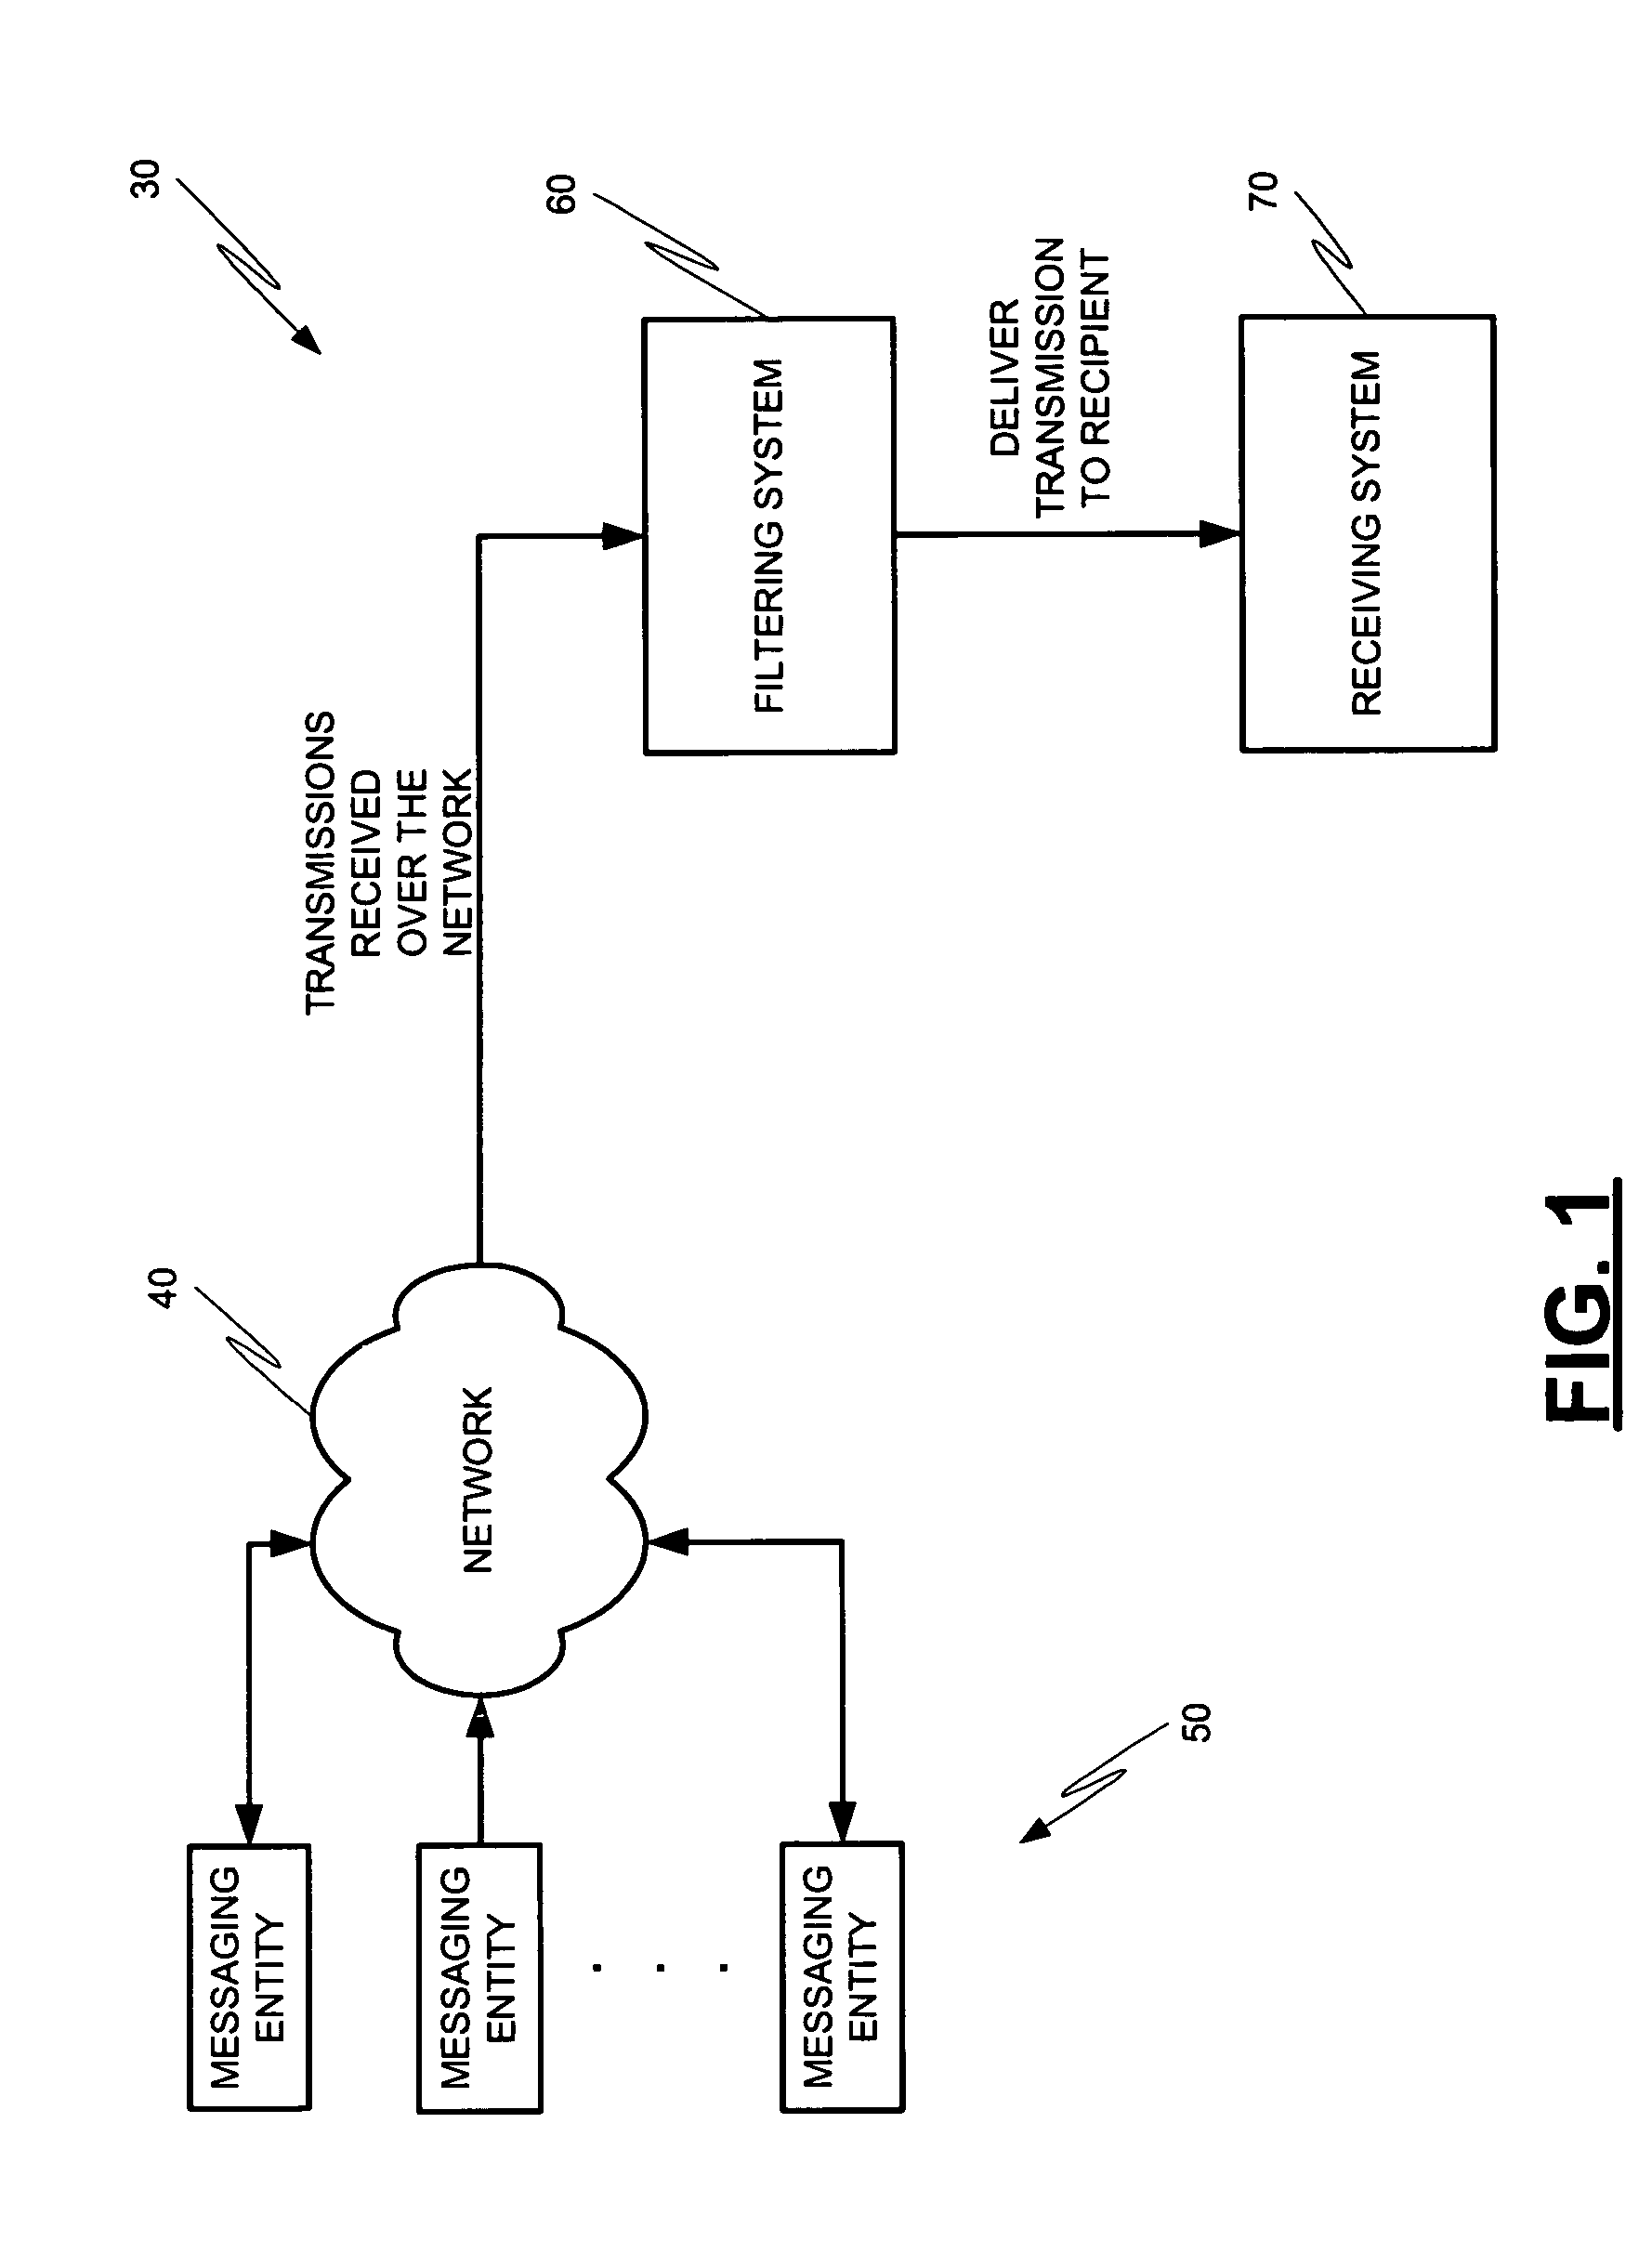 Message profiling systems and methods